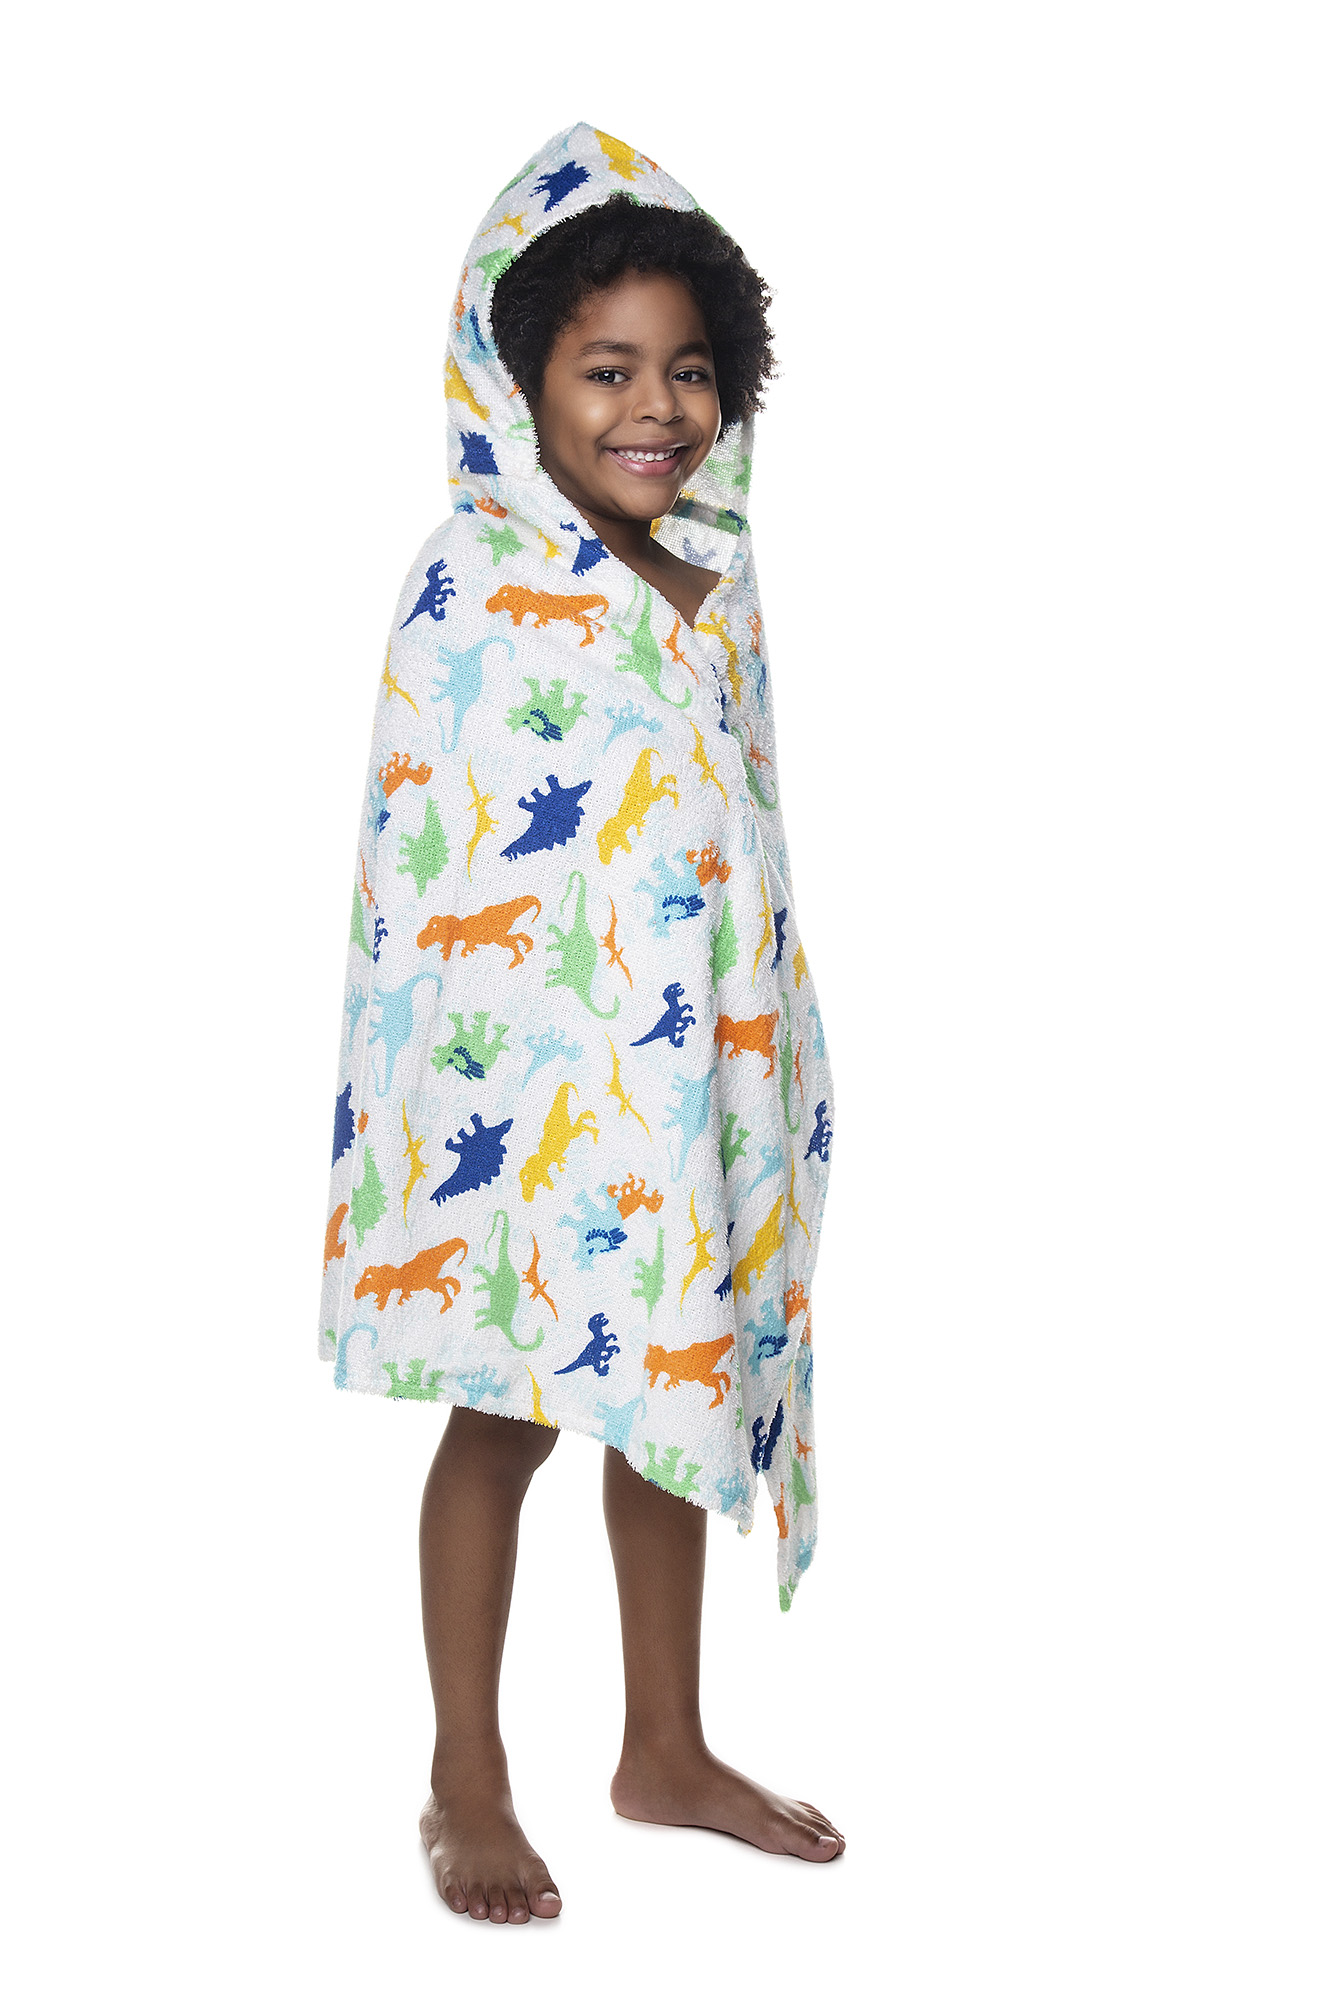 Jurássico Terry Towel Bath Printed With hood with 3 pieces